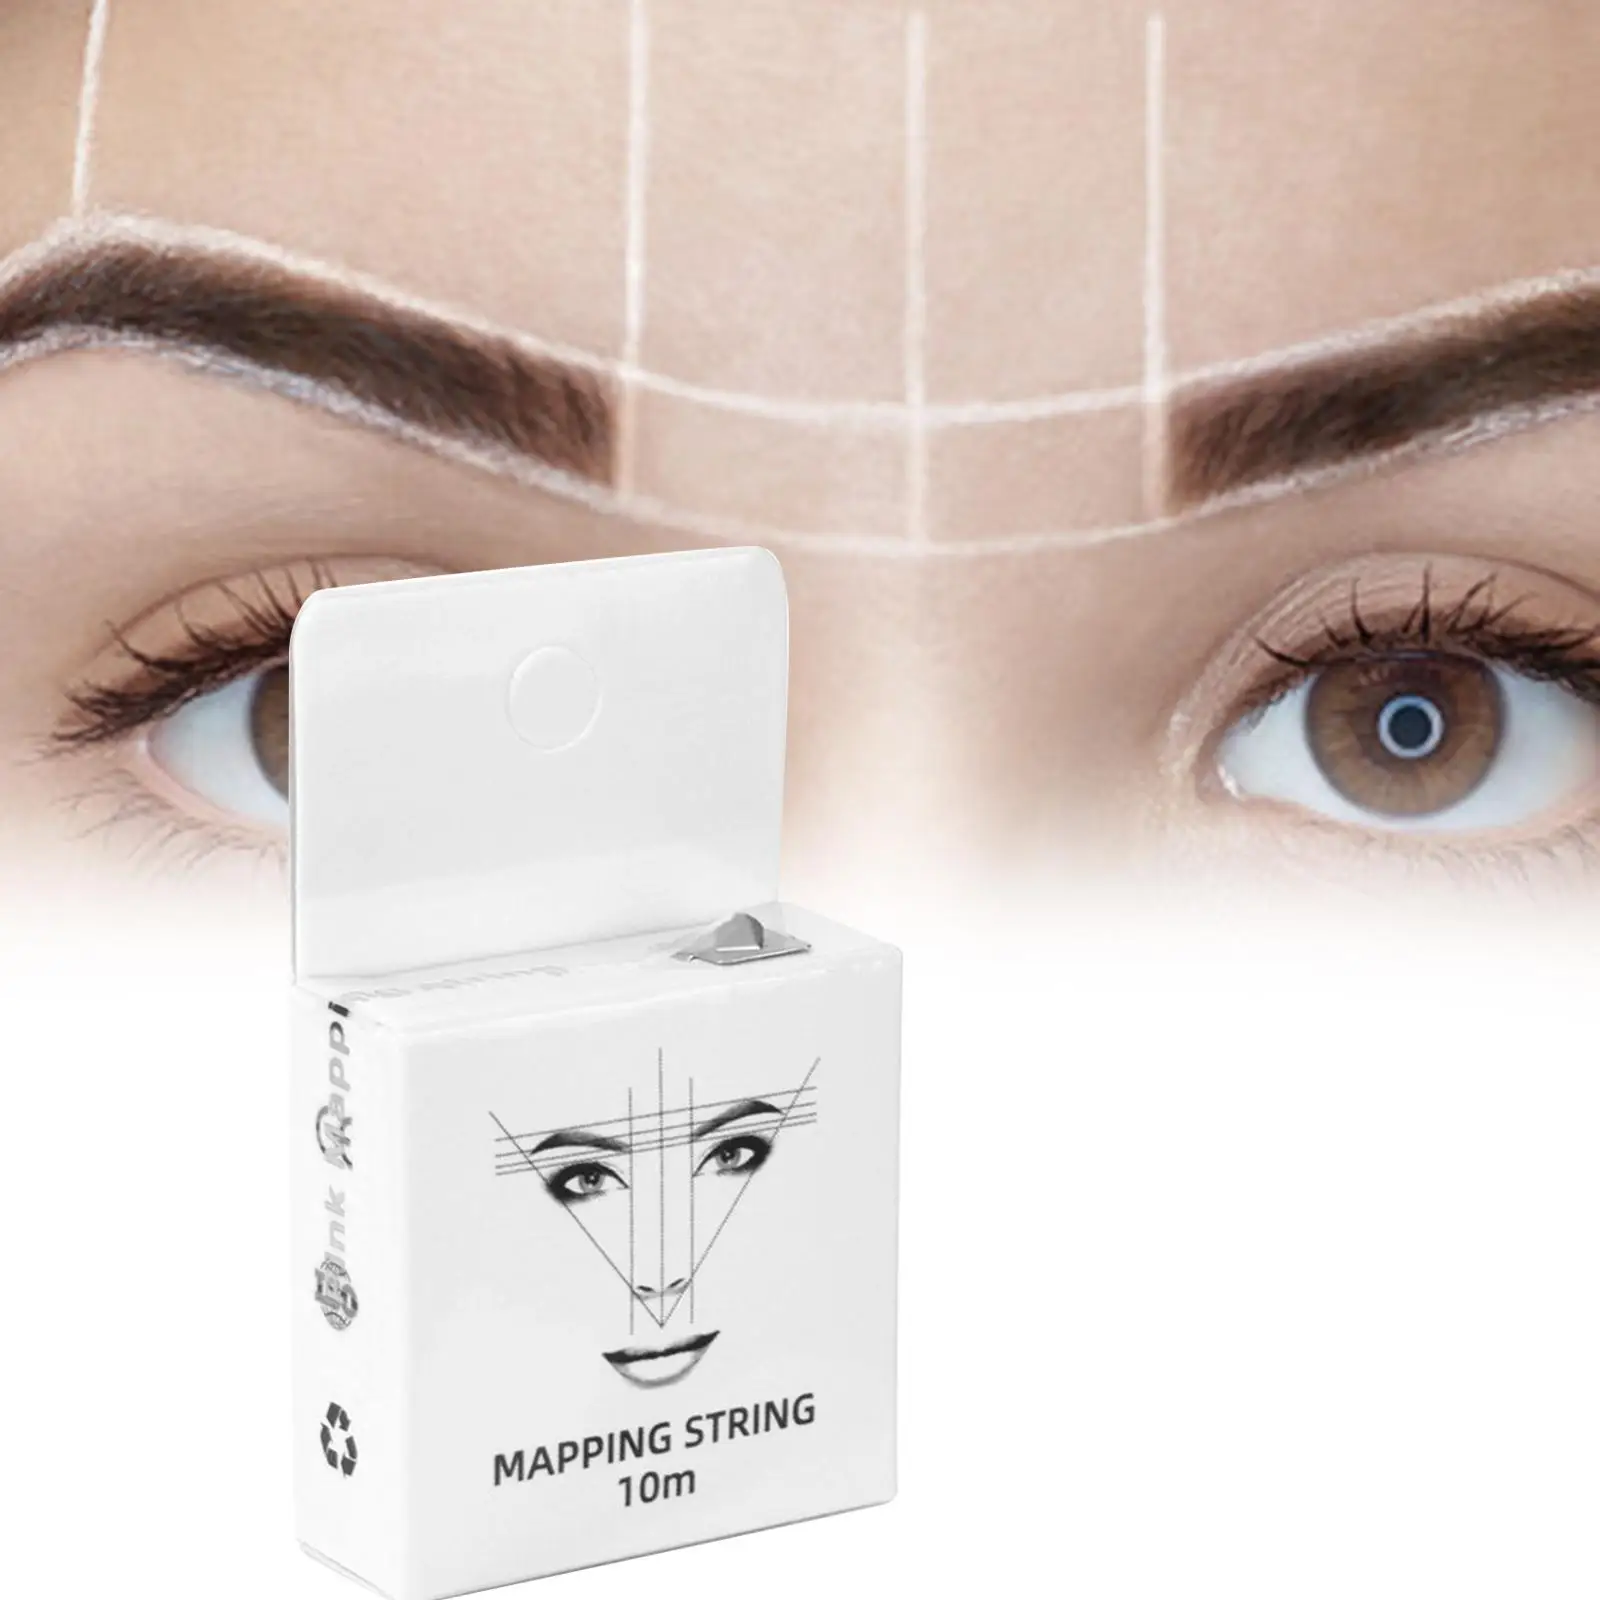 White Eyebrow Mapping String Positioning Mapping Line Auxiliary Line Drawing with permanent Makeup Eyebrow Thread Ruler